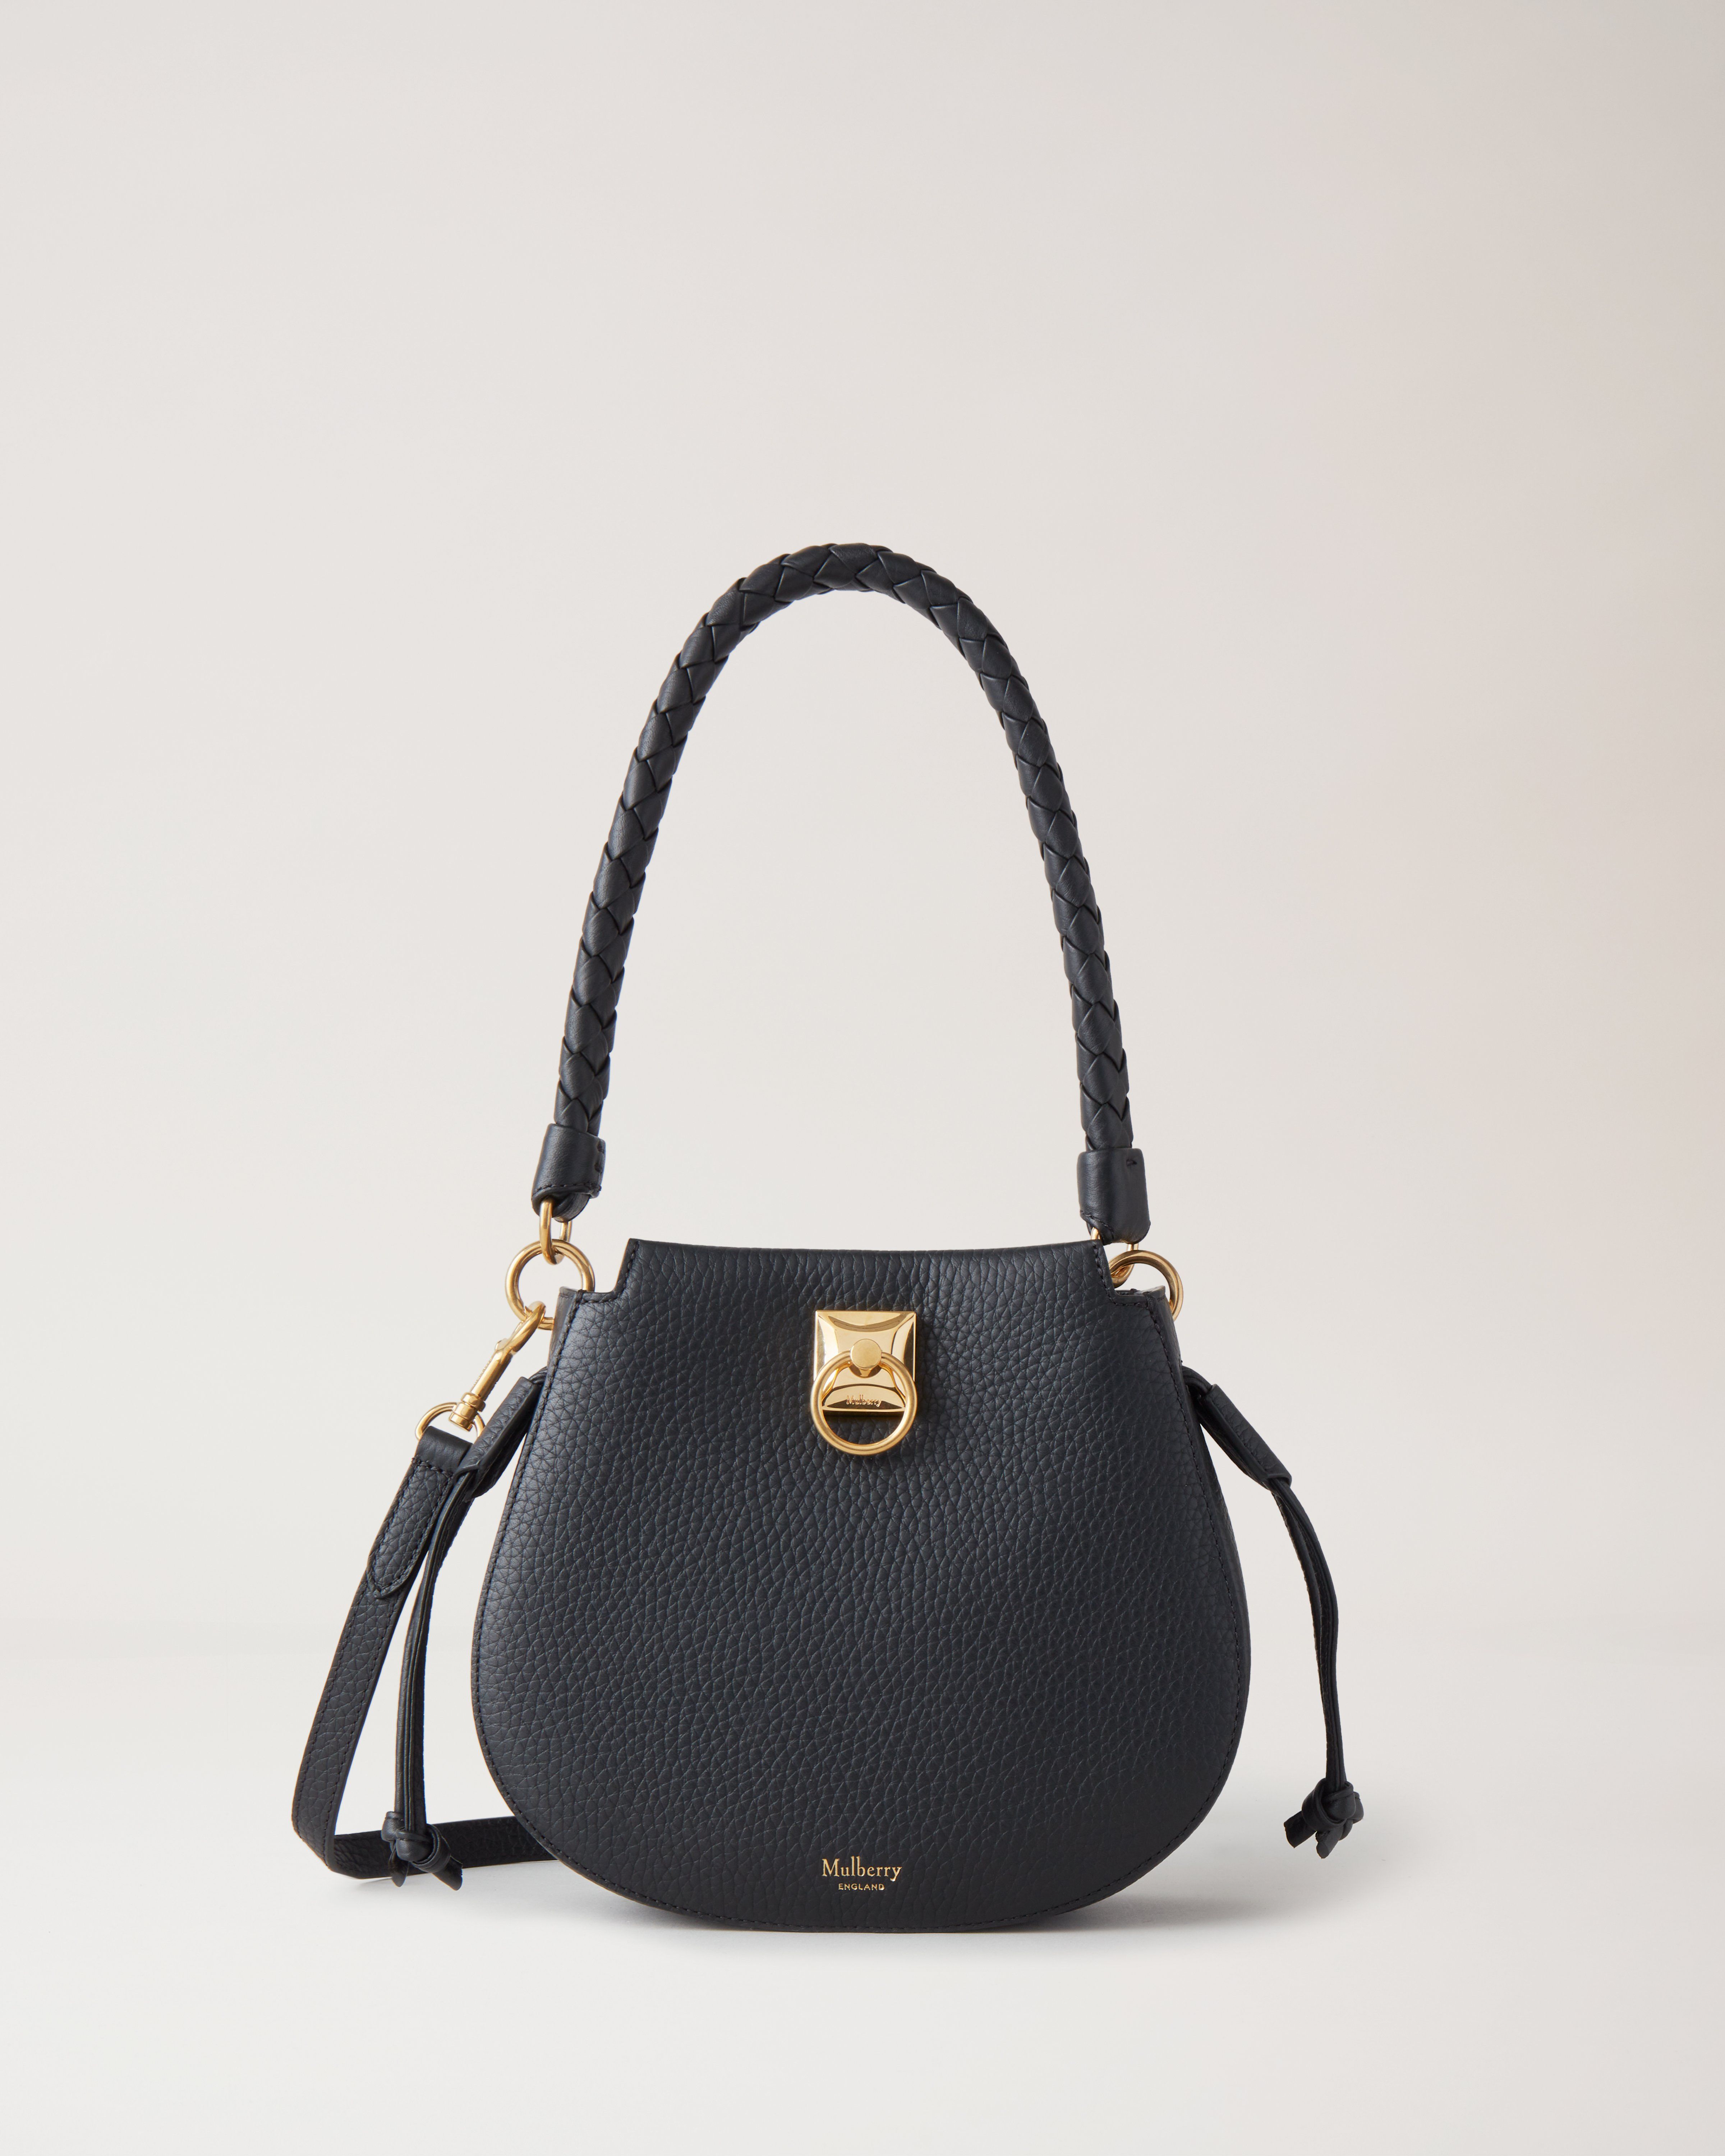 Mulberry's Iris Tote Is The New Millennial IT Bag